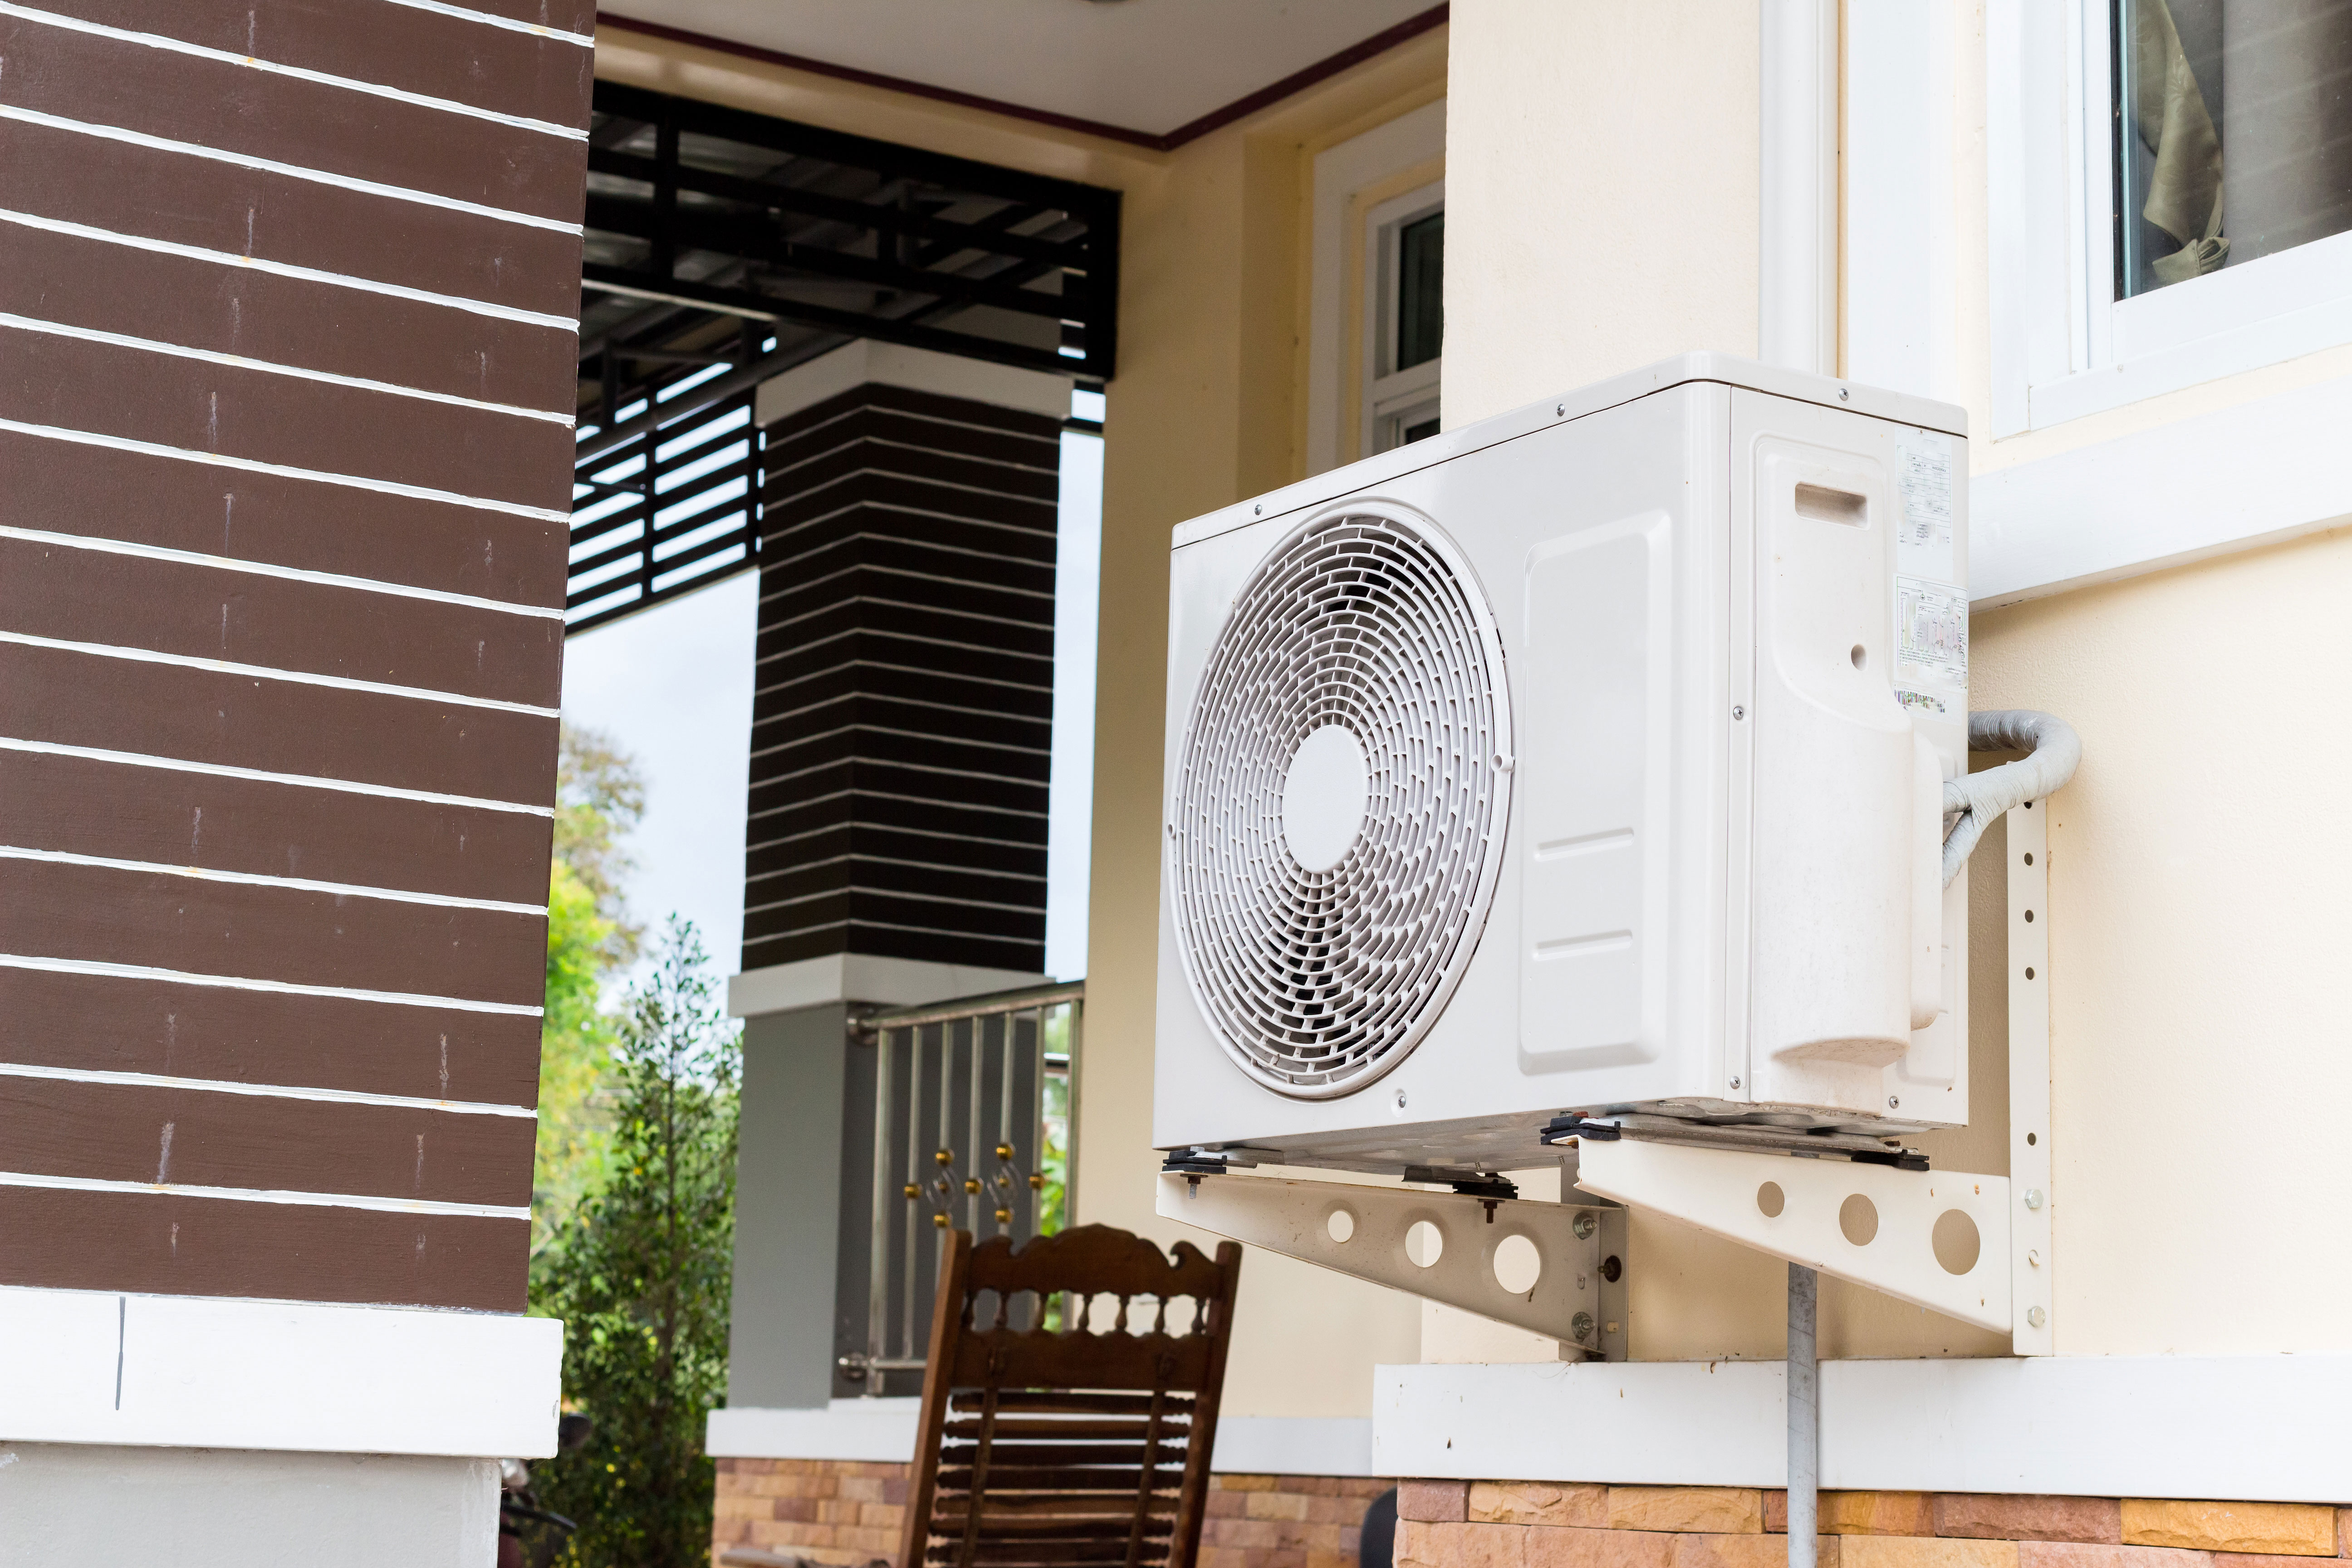 r580-ductless-gettyimages-1071405212.jpg